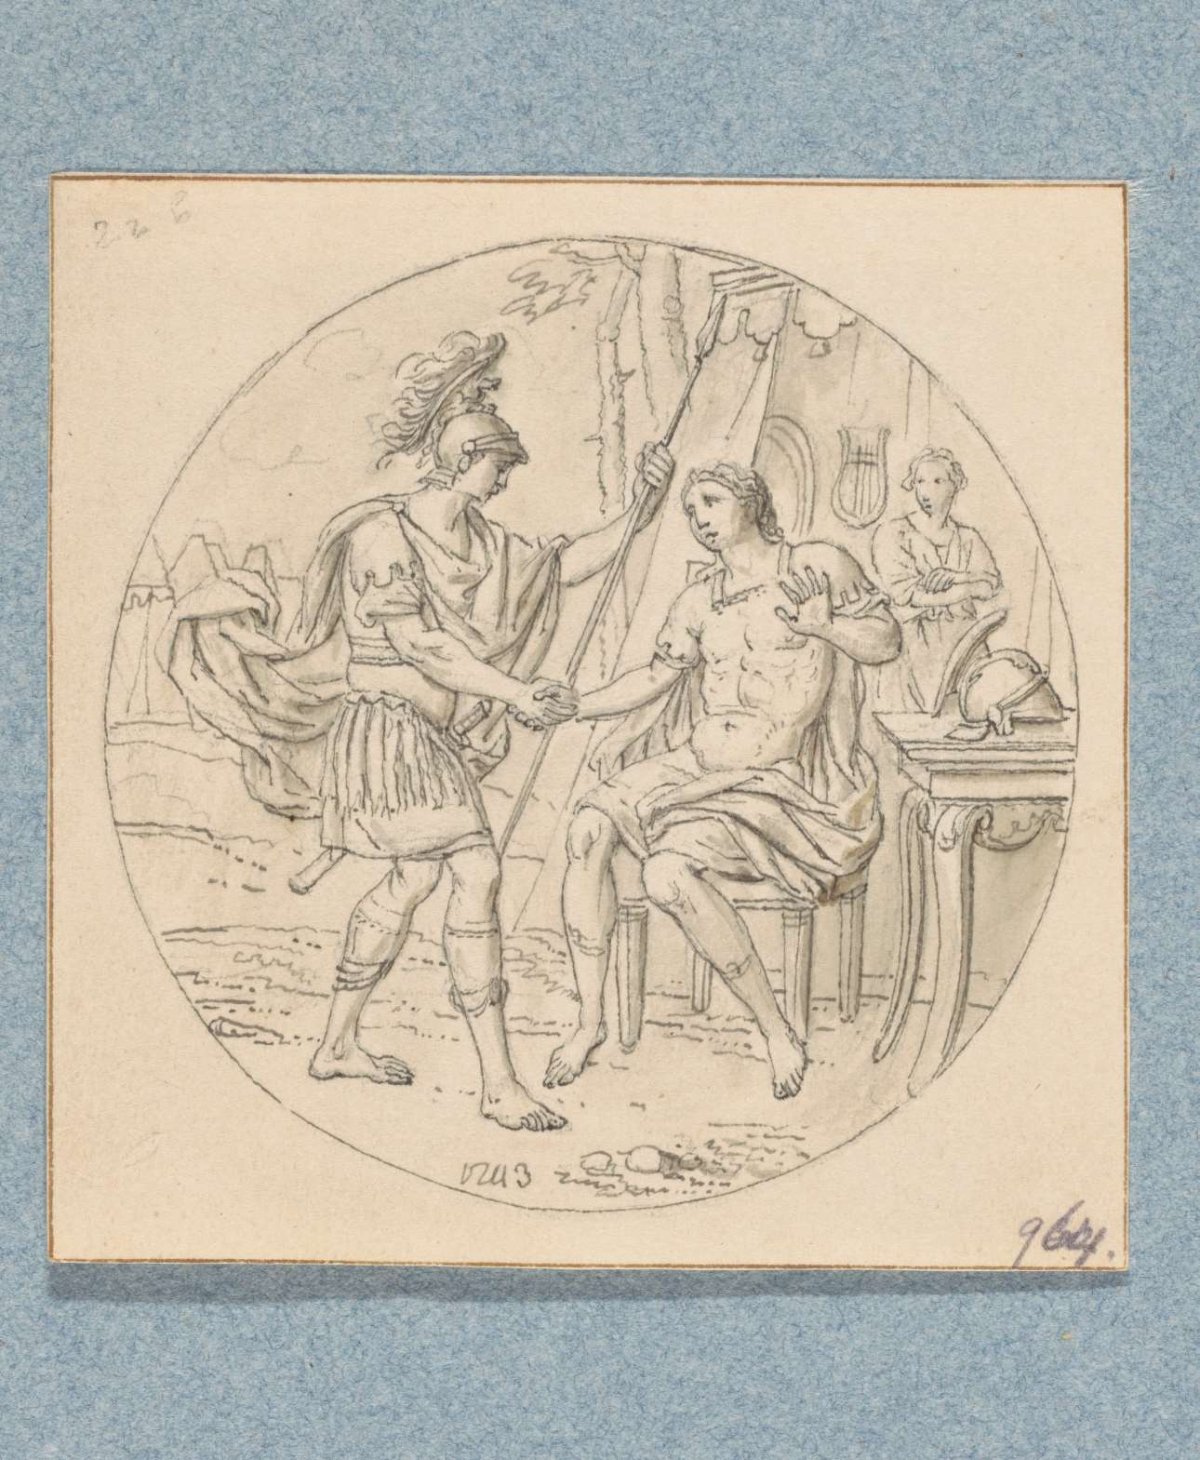 Arriving soldier shakes hands with a seated man (in box of 43 drawings), Louis Fabritius Dubourg, 1743